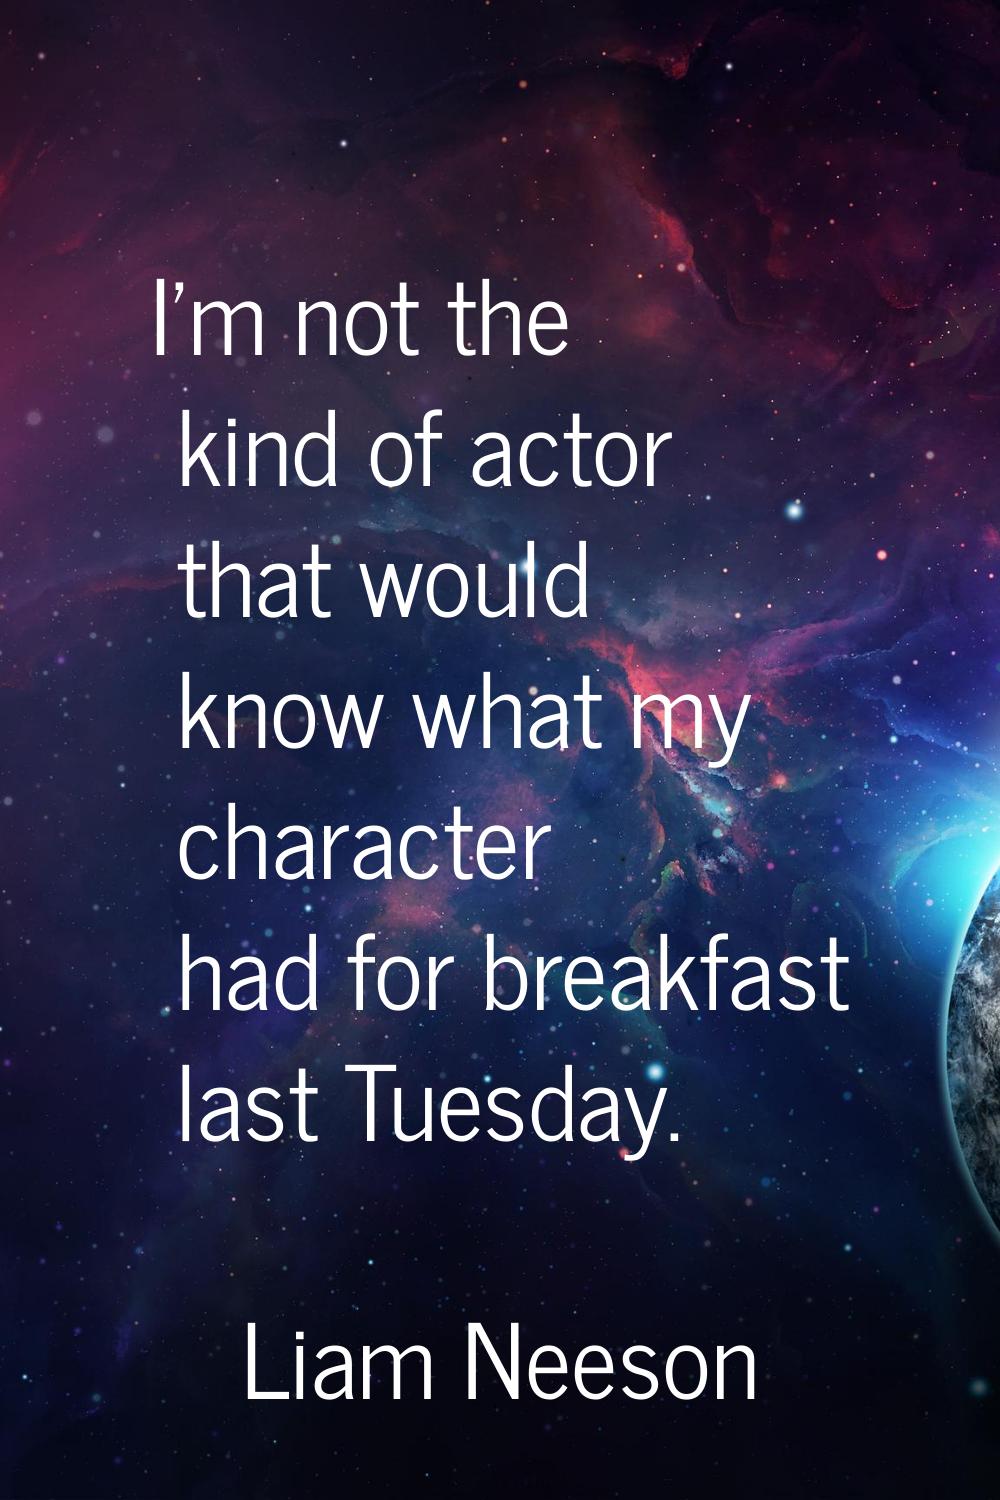 I'm not the kind of actor that would know what my character had for breakfast last Tuesday.